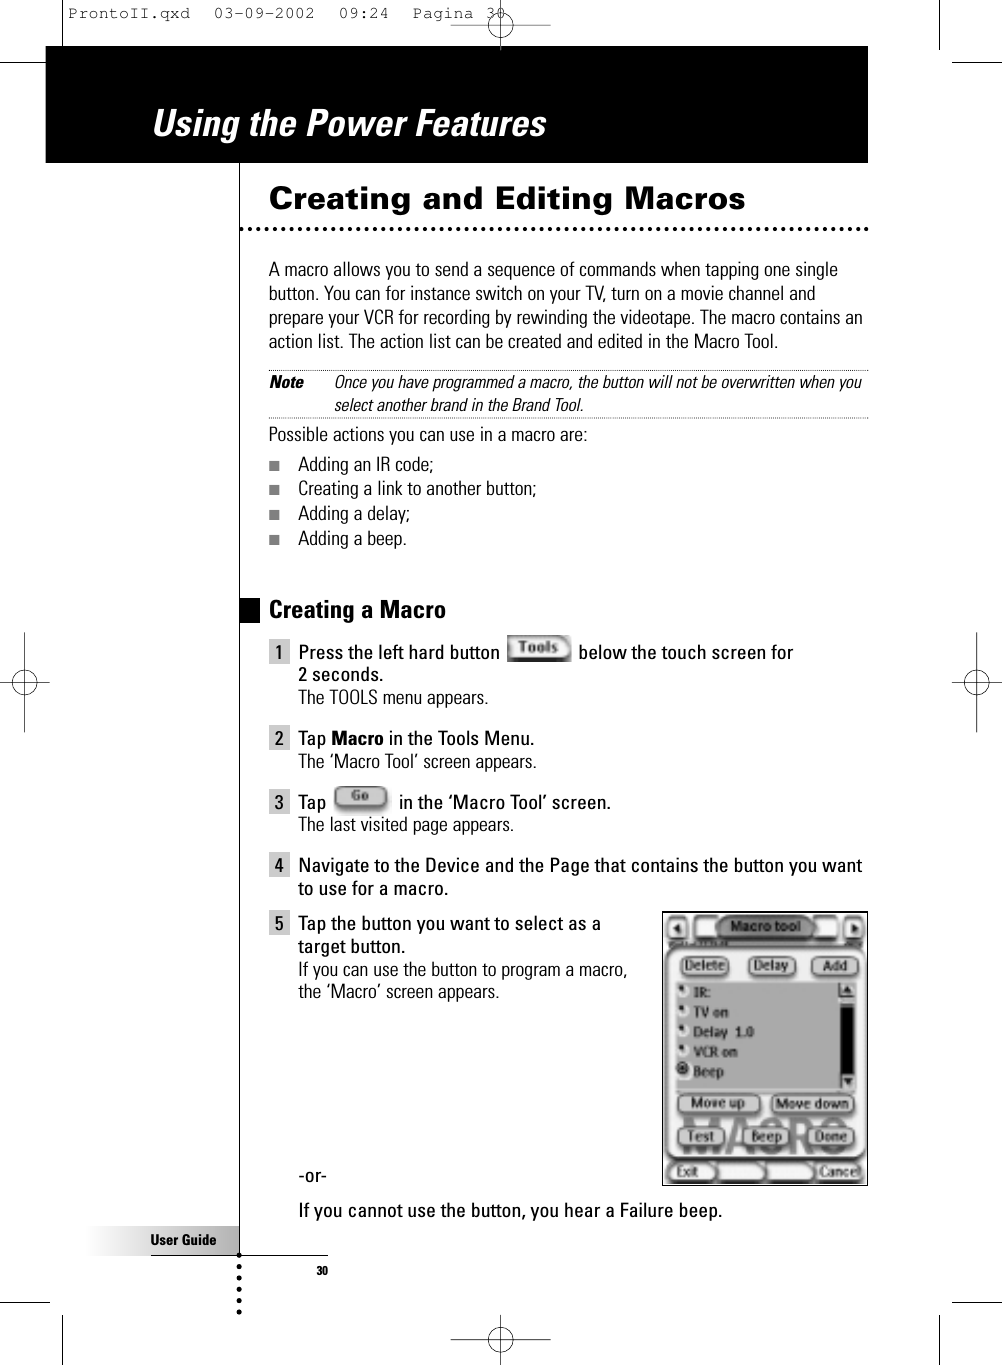 User Guide30Using the Power FeaturesCreating and Editing MacrosA macro allows you to send a sequence of commands when tapping one singlebutton. You can for instance switch on your TV, turn on a movie channel andprepare your VCR for recording by rewinding the videotape. The macro contains anaction list. The action list can be created and edited in the Macro Tool.Note Once you have programmed a macro, the button will not be overwritten when youselect another brand in the Brand Tool.Possible actions you can use in a macro are:■Adding an IR code;■Creating a link to another button;■Adding a delay;■Adding a beep.Creating a Macro1 Press the left hard button  below the touch screen for 2 seconds.The TOOLS menu appears.2 Tap Macro in the Tools Menu. The ‘Macro Tool’ screen appears.3 Tap  in the ‘Macro Tool’ screen.The last visited page appears.4 Navigate to the Device and the Page that contains the button you wantto use for a macro.5 Tap the button you want to select as a target button.If you can use the button to program a macro, the ‘Macro’ screen appears.-or-If you cannot use the button, you hear a Failure beep.ProntoII.qxd  03-09-2002  09:24  Pagina 30